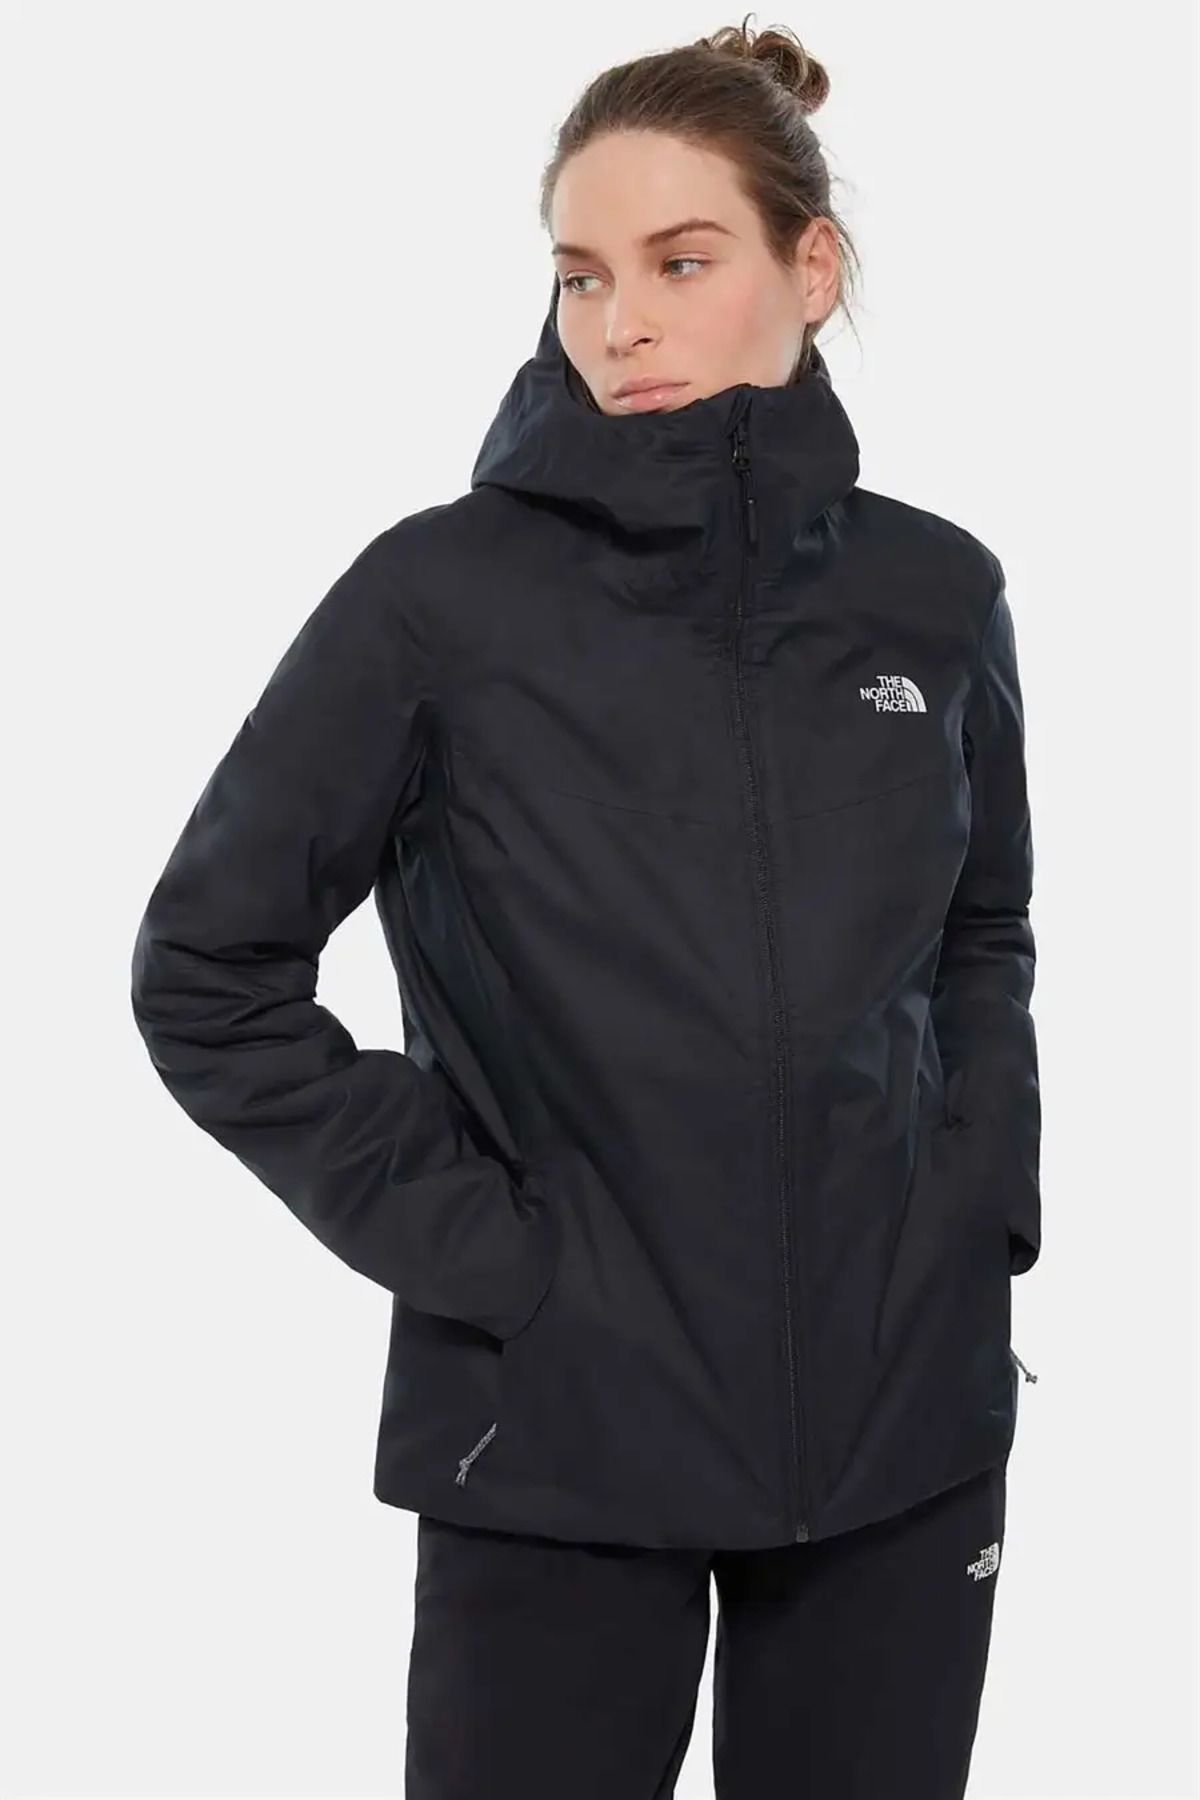 The North Face Quest Insulated Kadın Mont - Nf0a3y1jjk31